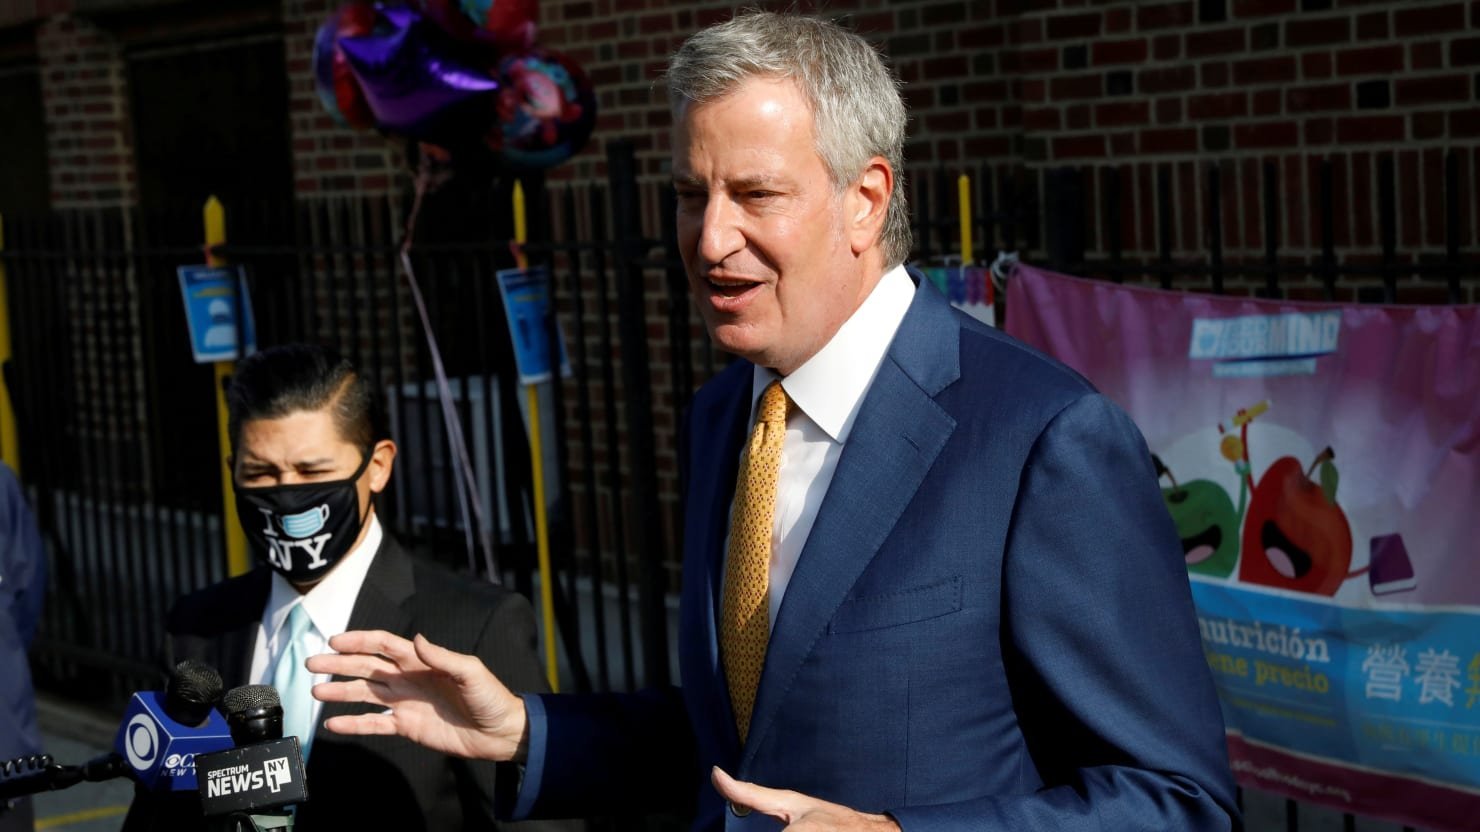 Cop Union Vows to Block NYC Mayor’s New Vax Mandate